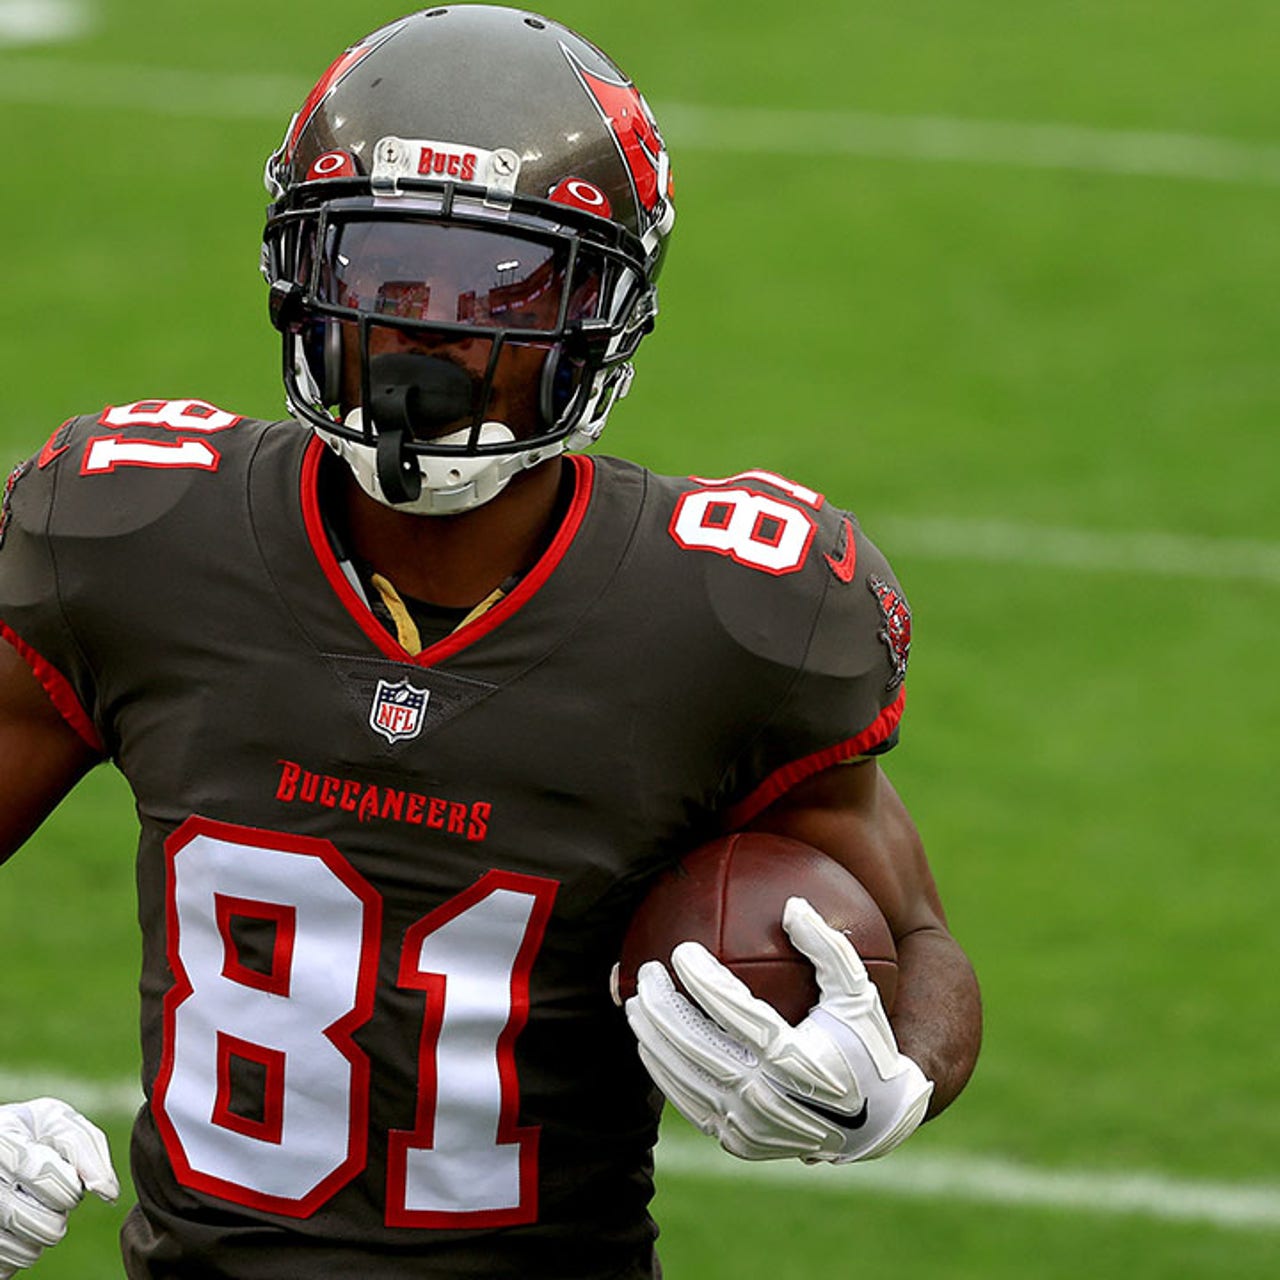 Antonio Brown Quits Buccaneers Team Mid-Game, Removes Pads and